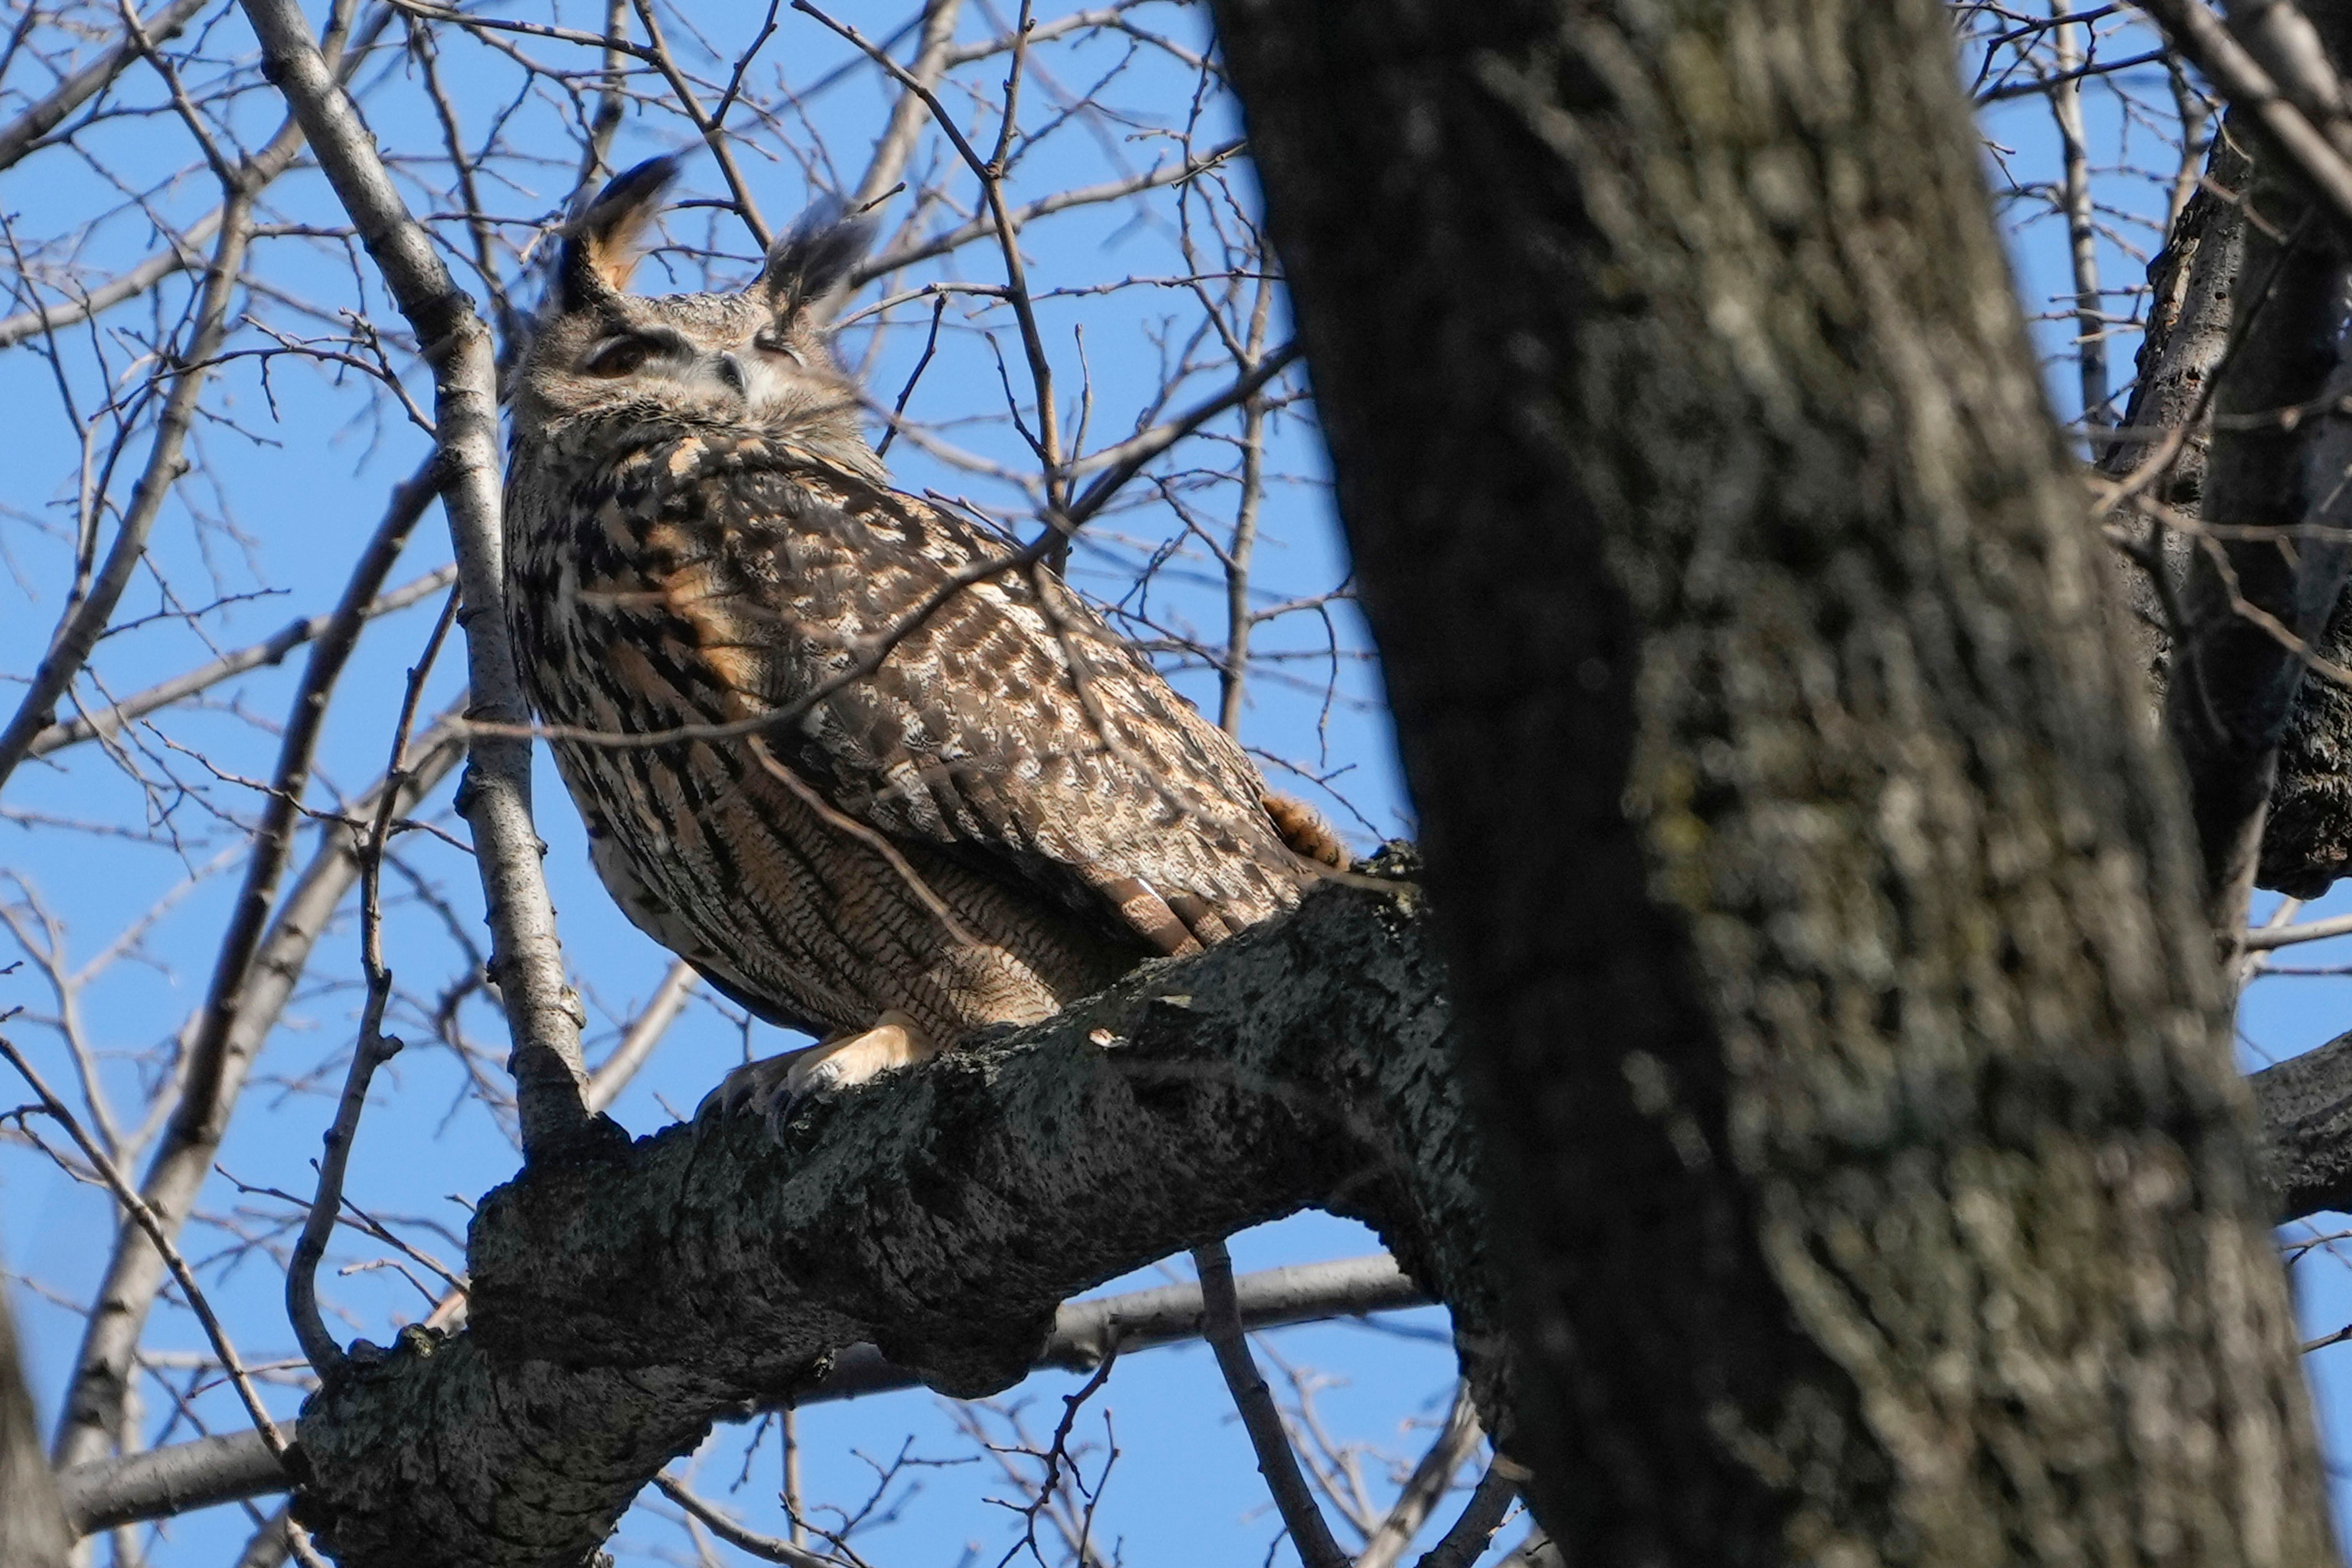 Flaco the owl has been living free in New York City’s Central Park since February